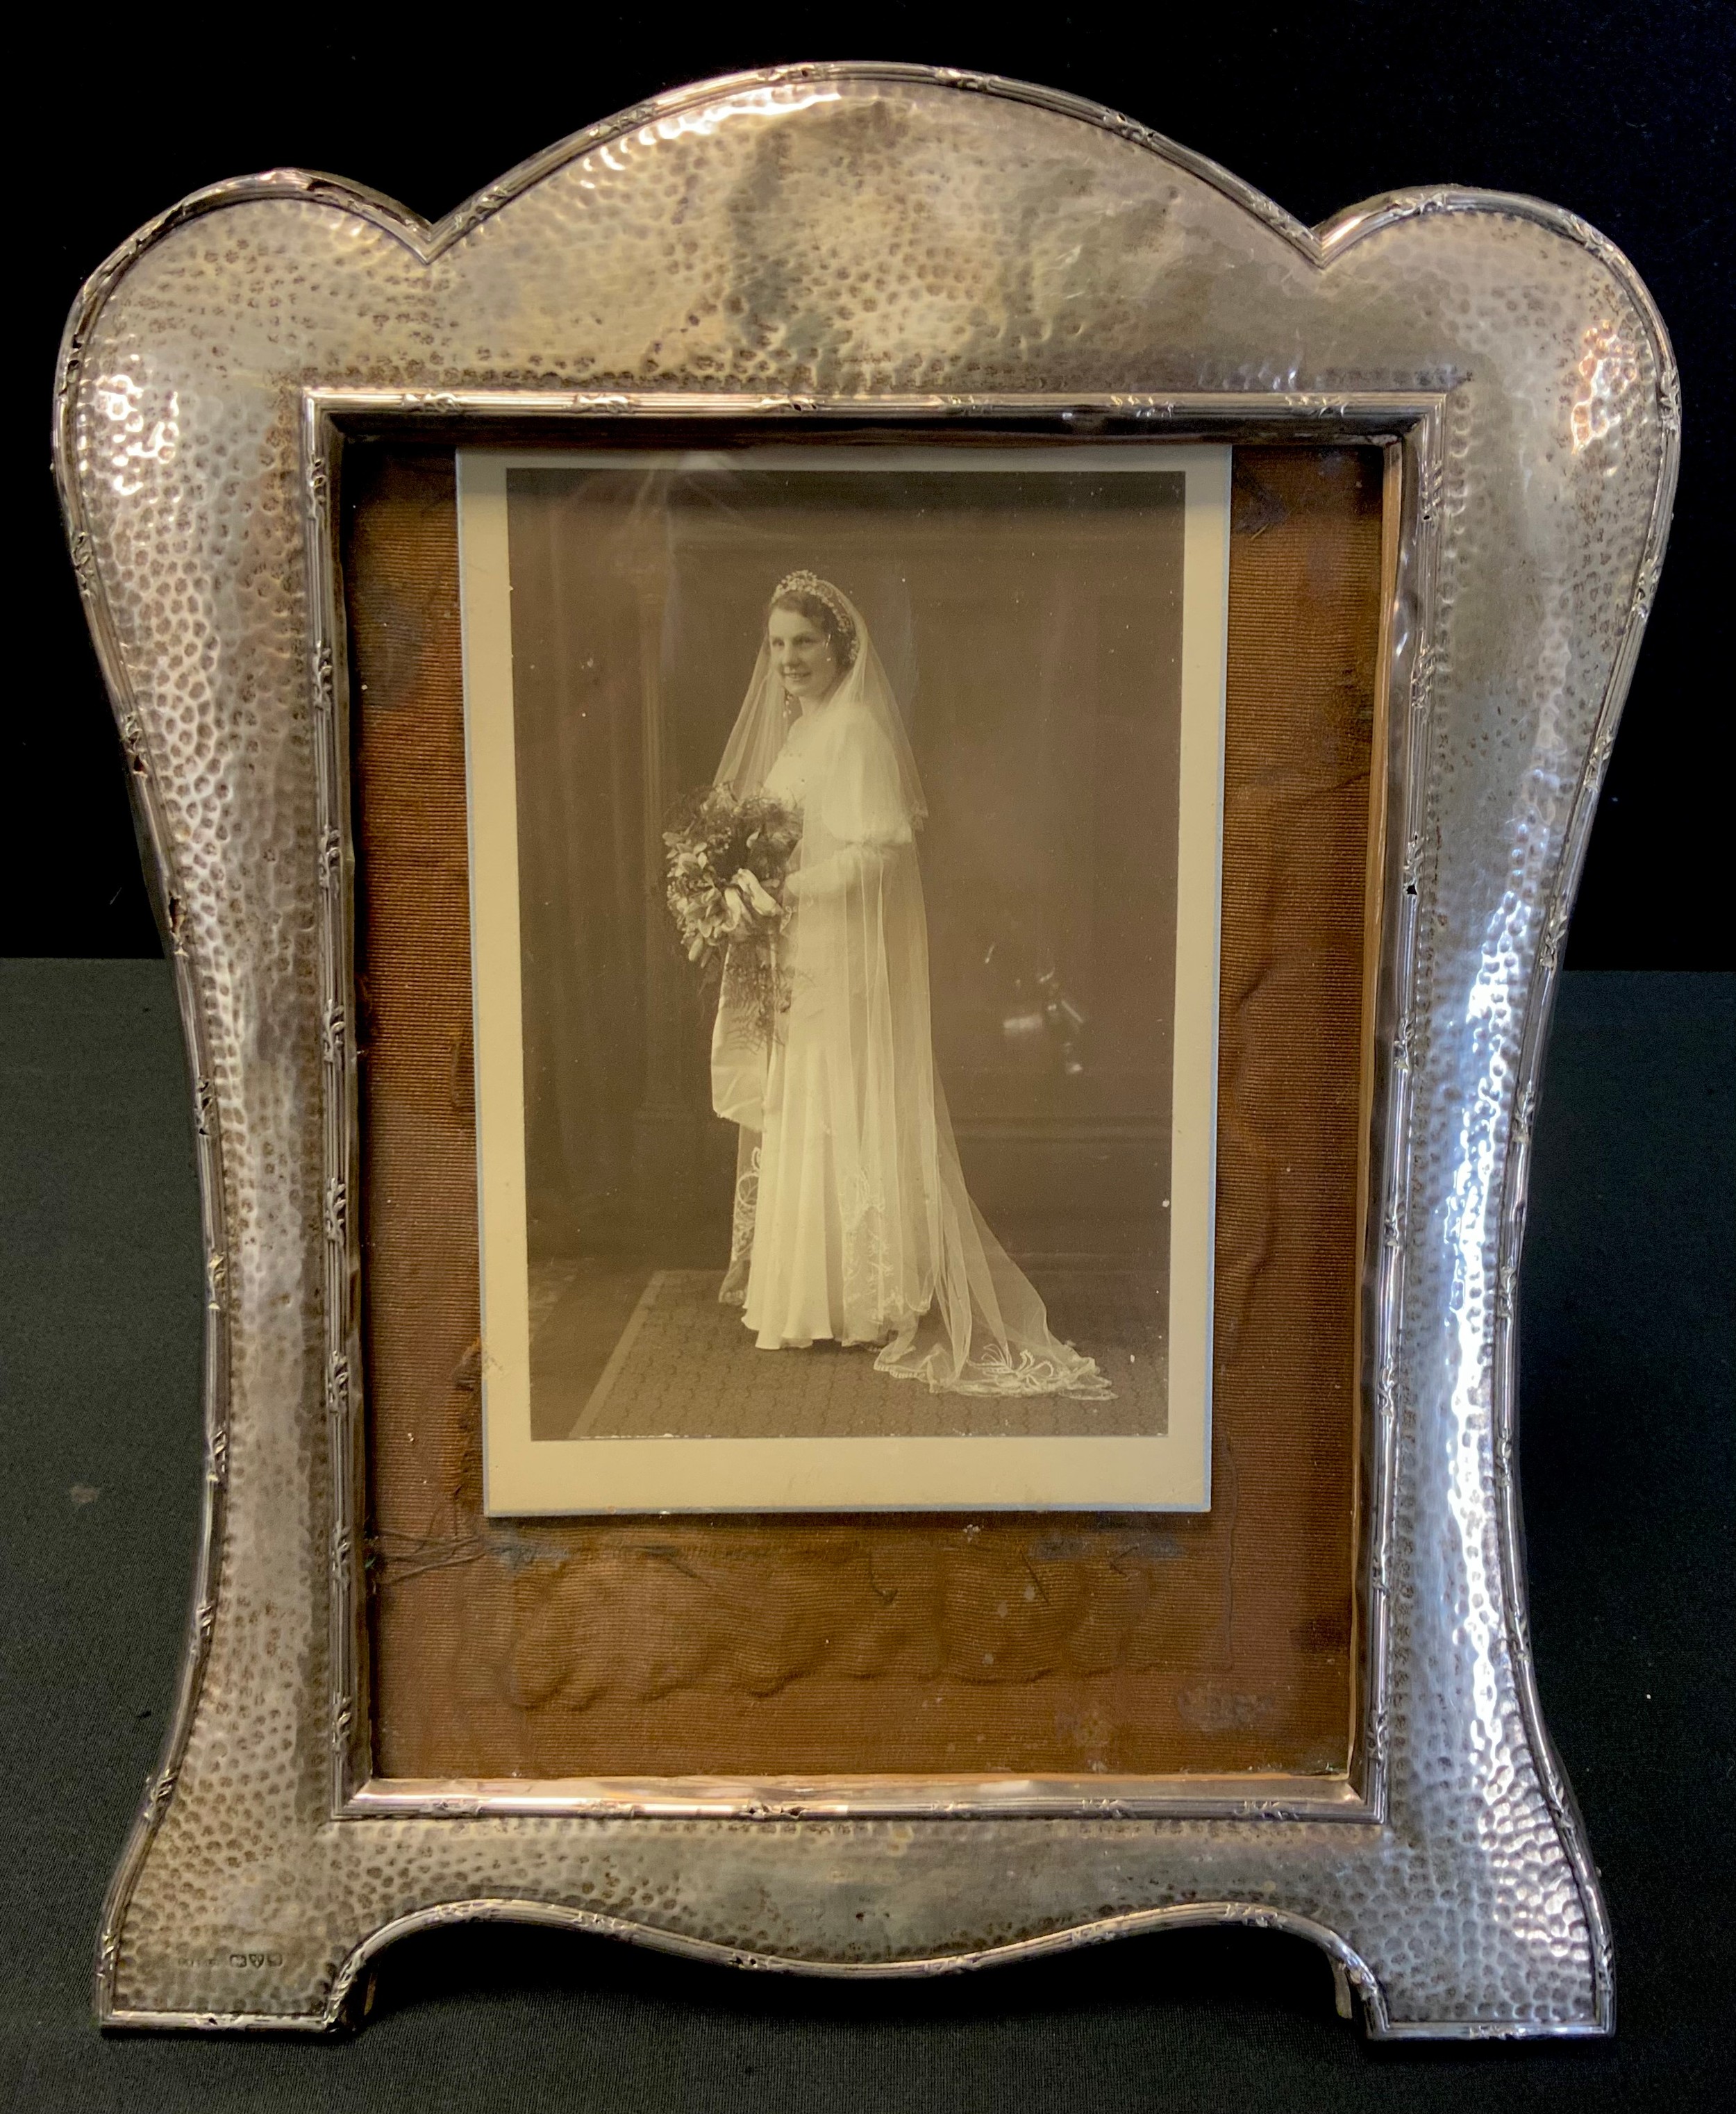 An Edwardian Arts and Crafts silver photograph frame, arched top, easel stand, S Blanckensee & Son